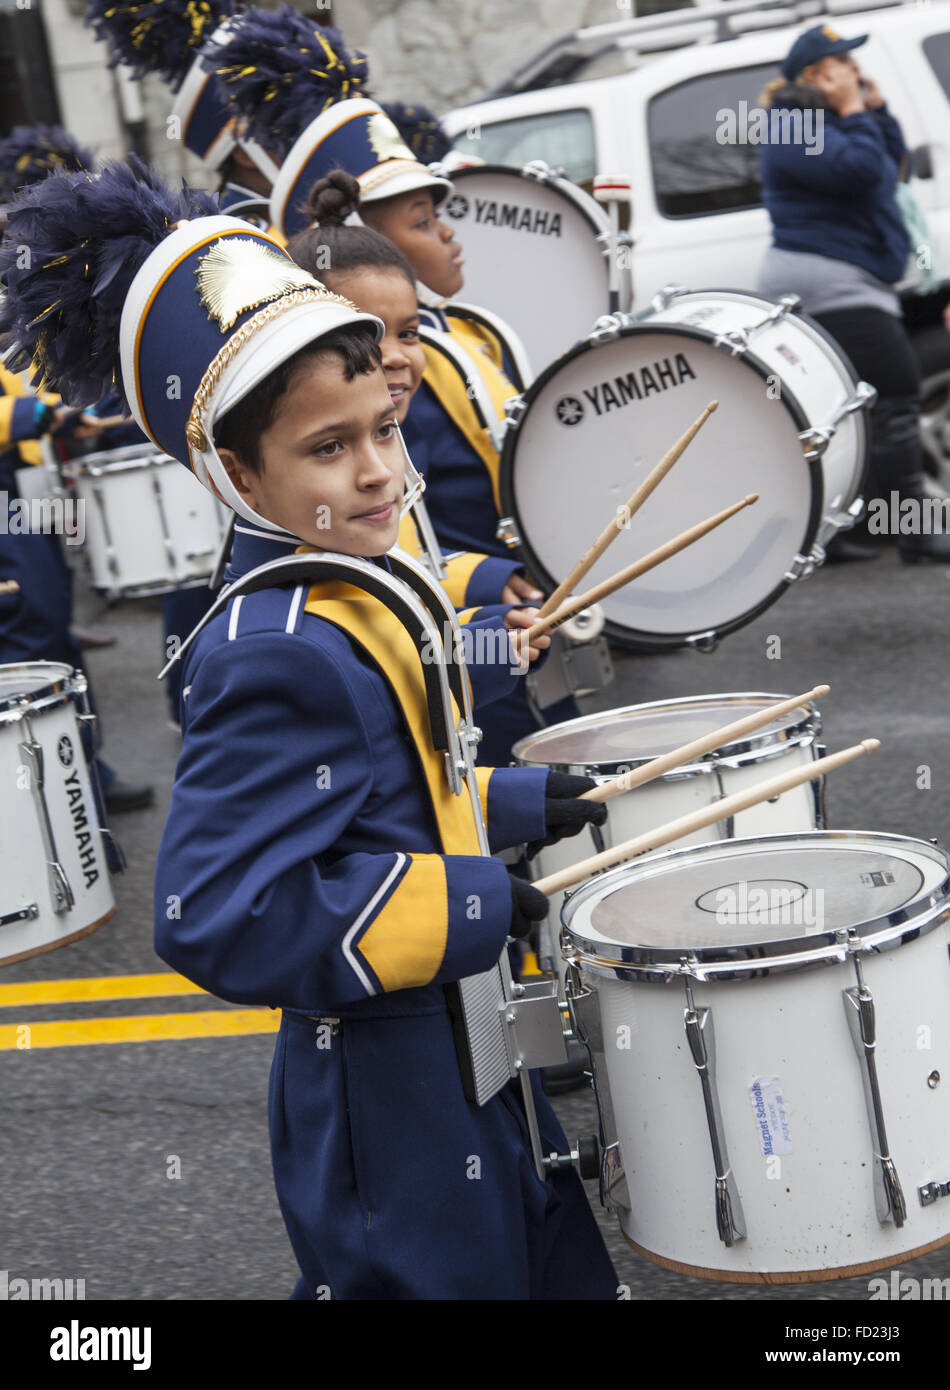 Elementary school marching band at the Three Kings Day Parade in Williamsburg, Brooklyn, NY. Stock Photo